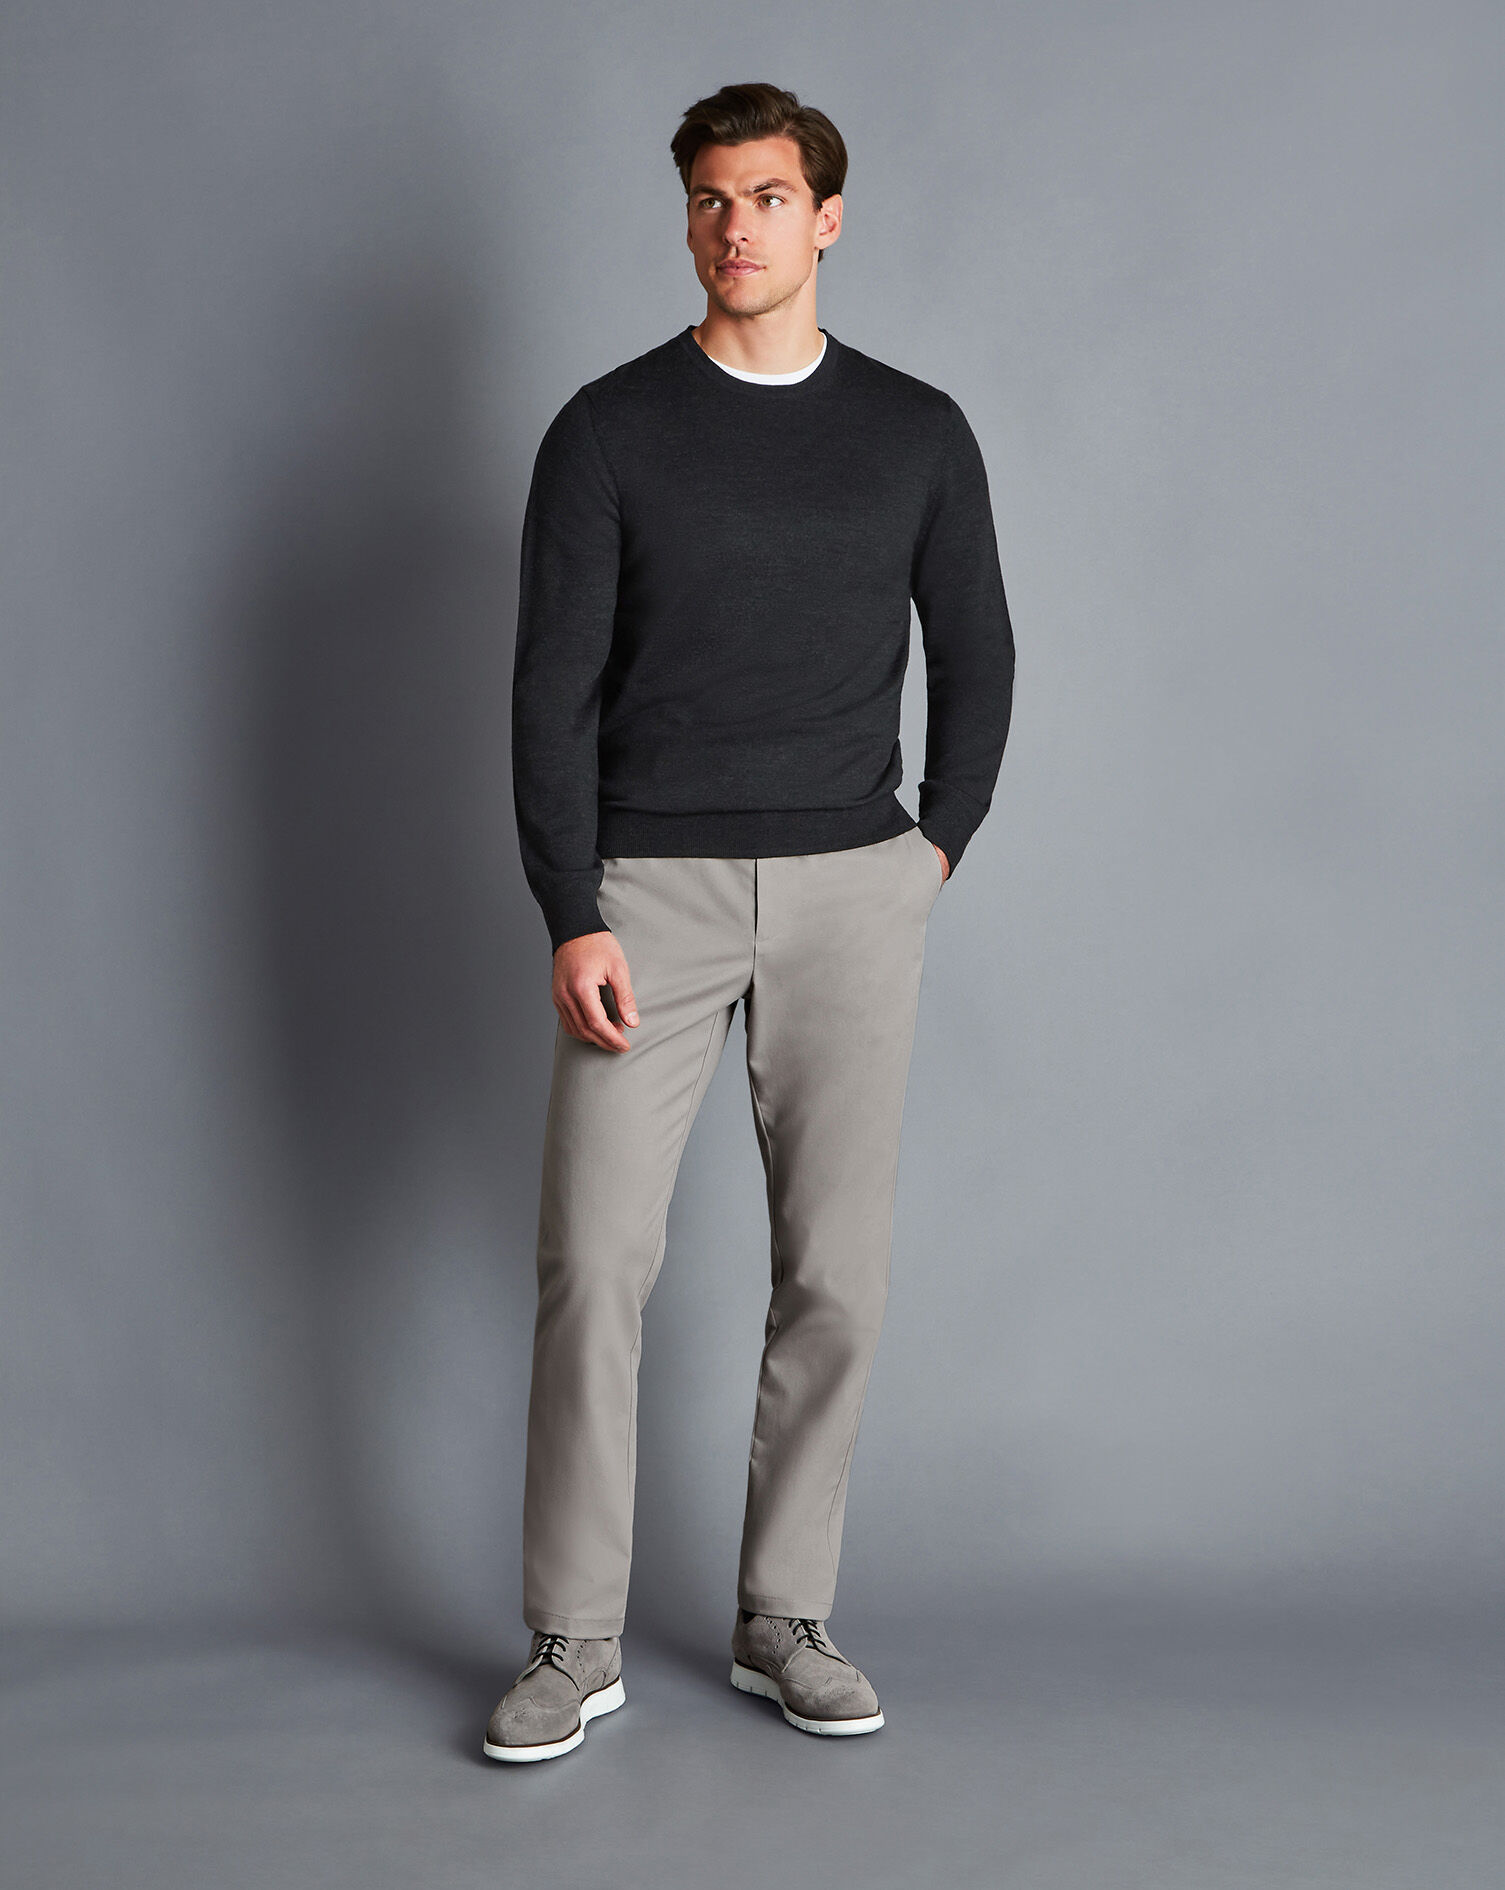 Which color shirt best suites grey trousers except the black one  Quora